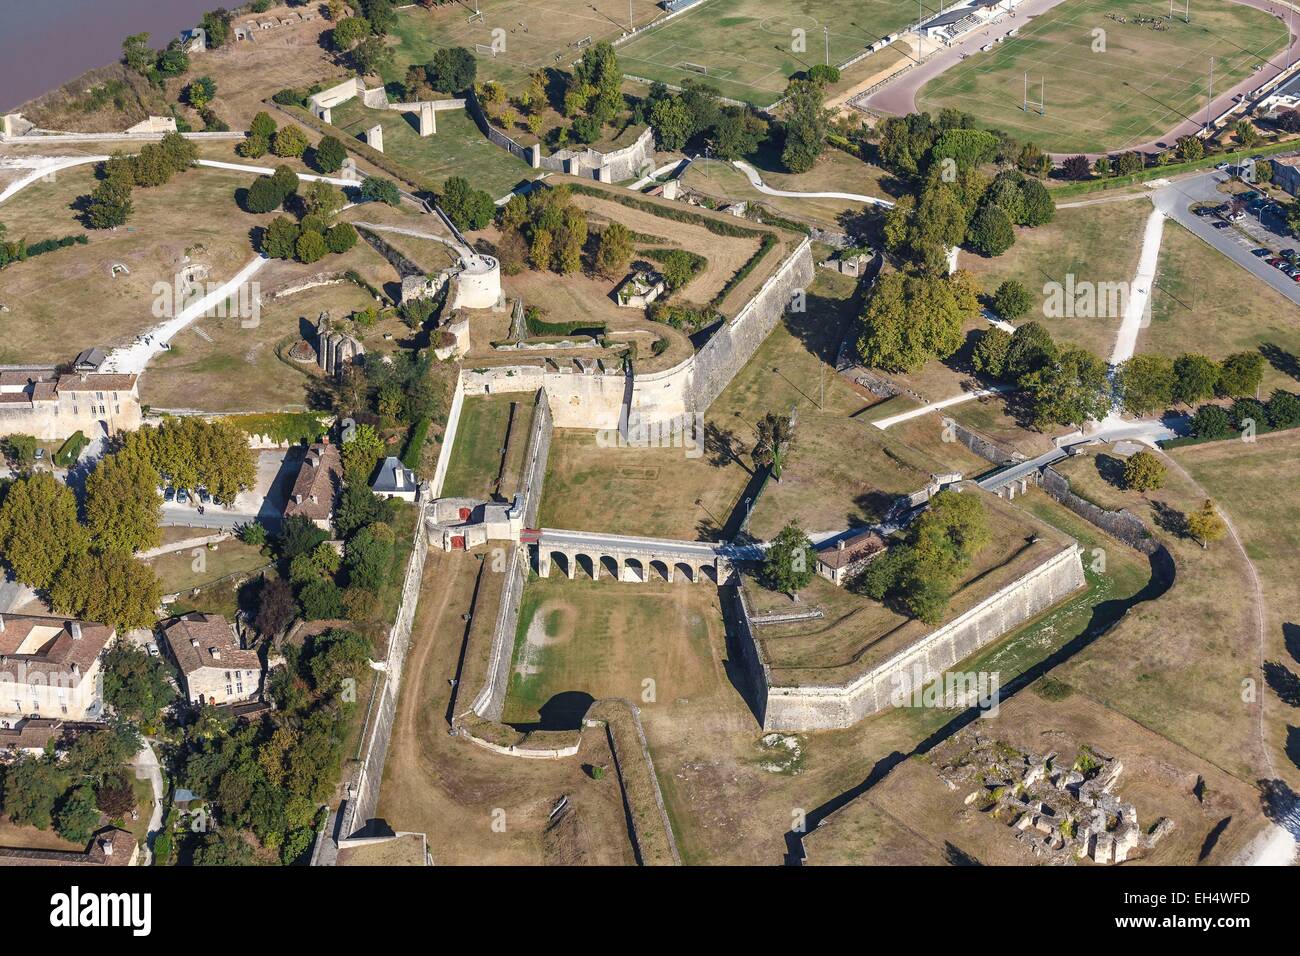 France, Gironde, Blaye, The citadel, Fortifications of Vauban, listed as World Heritage by UNESCO, the Porte royale and Rudel castle (aerial view) Stock Photo